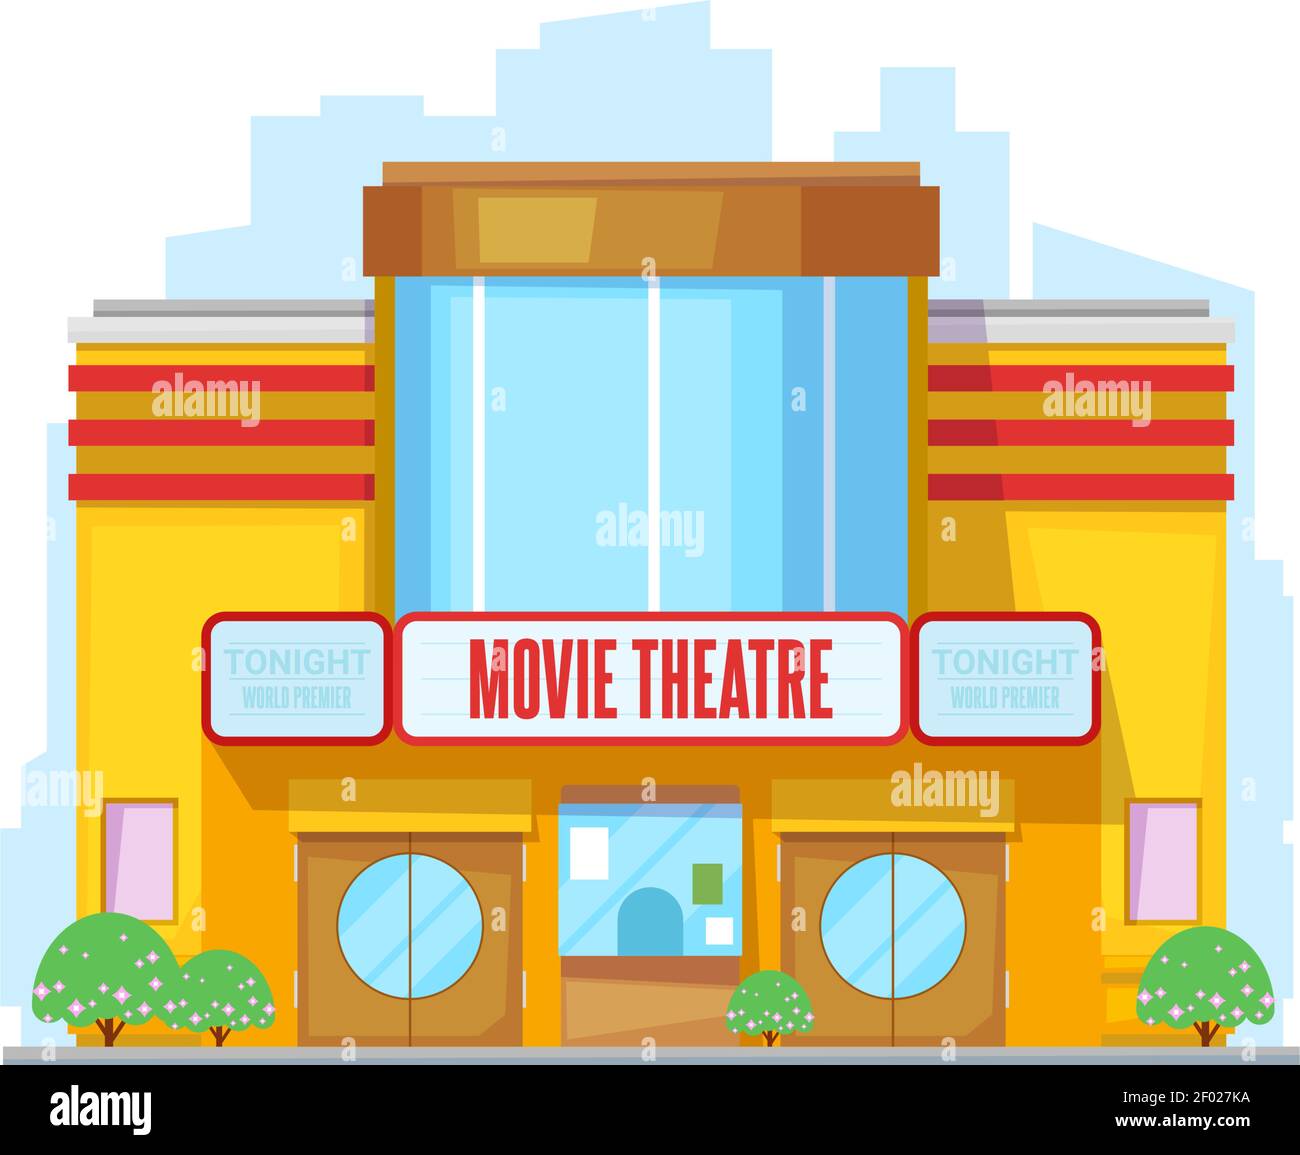 theater building clipart